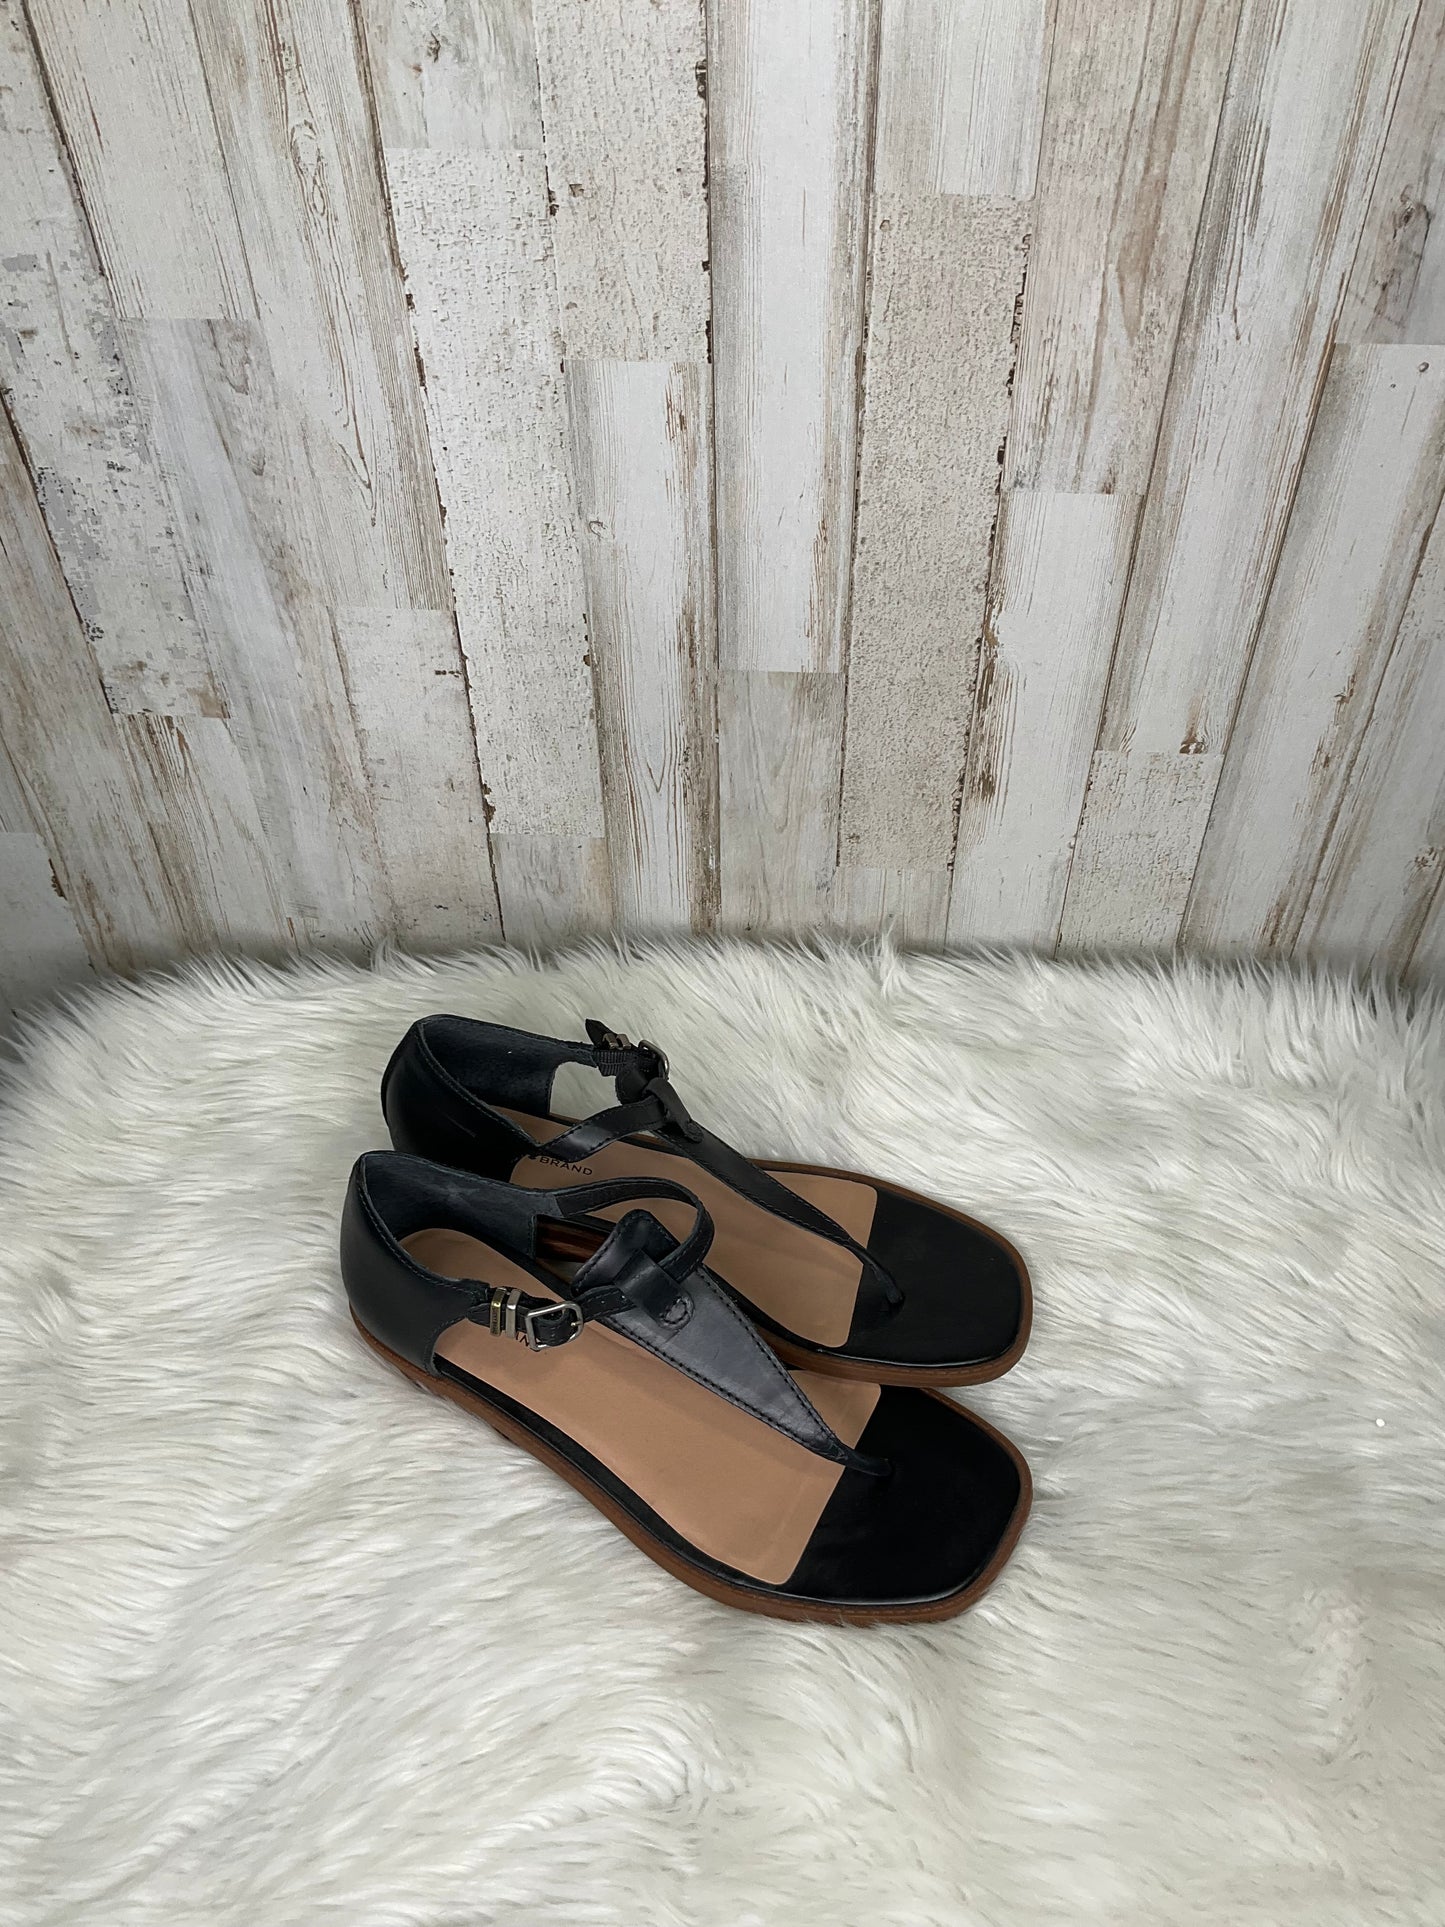 Sandals Heels Wedge By Lucky Brand  Size: 9.5